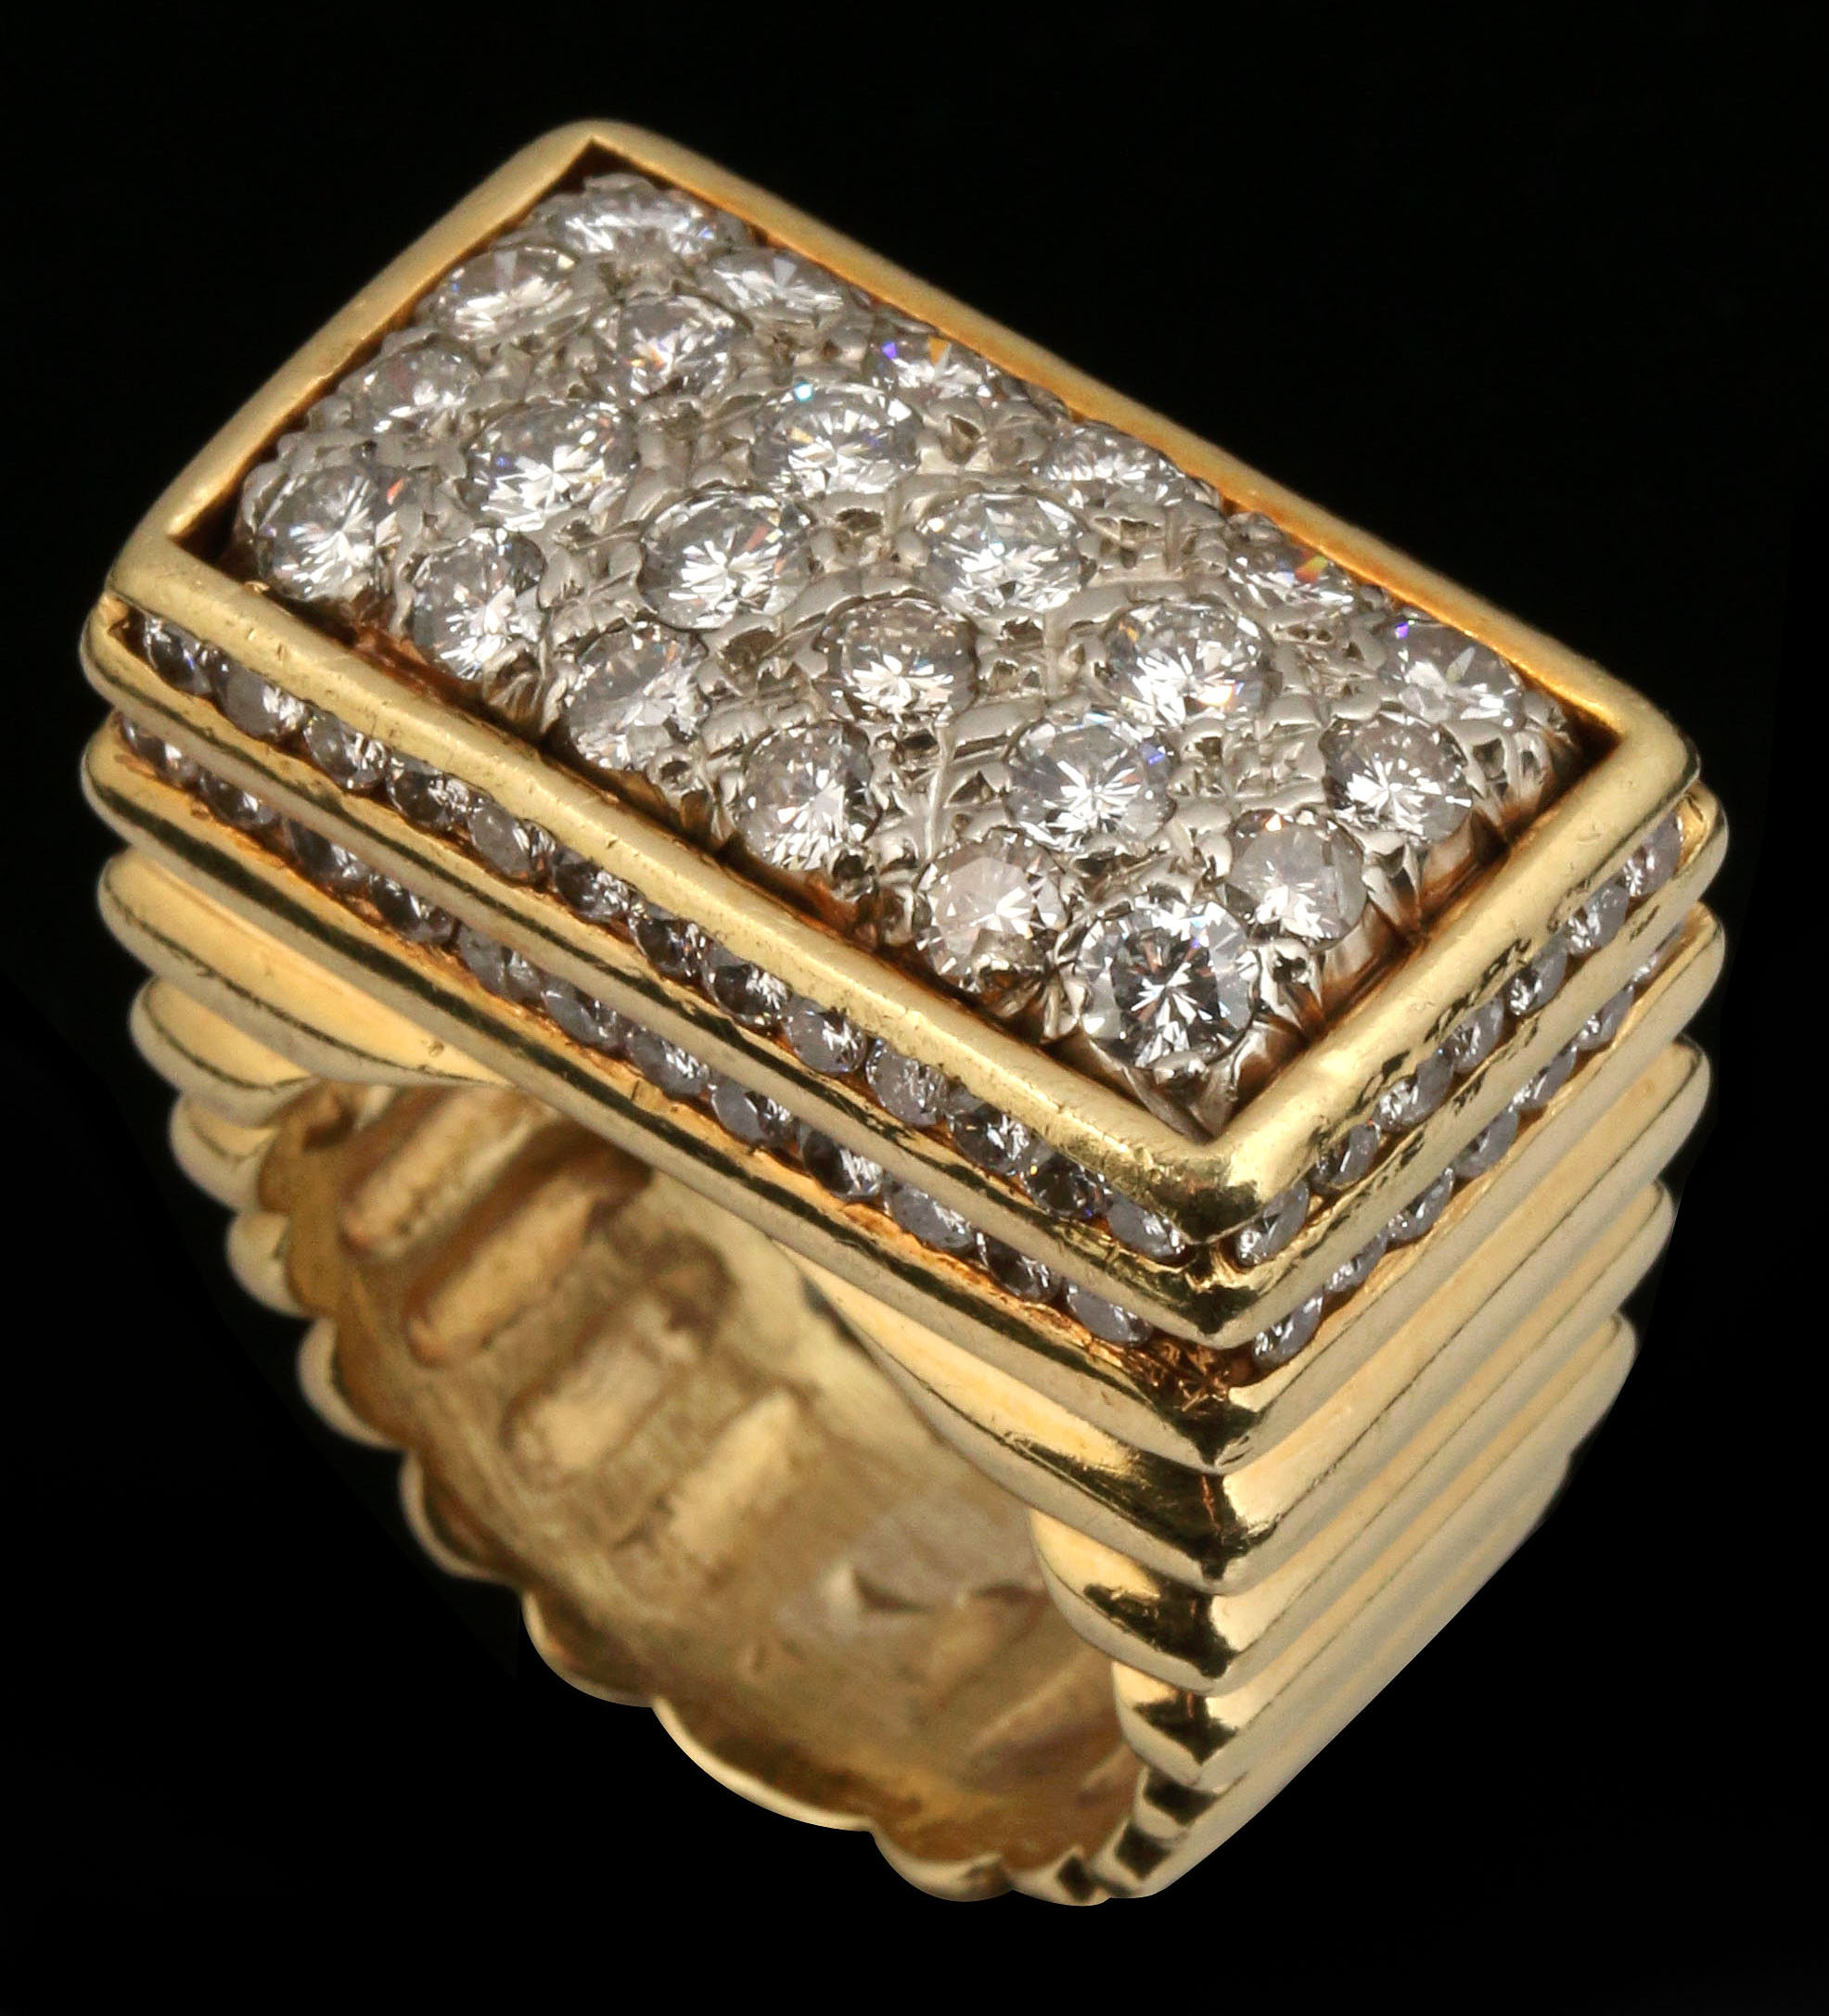 A GENT'S 18K DIAMOND RING APPROX 3.2 CARATS TOTAL 